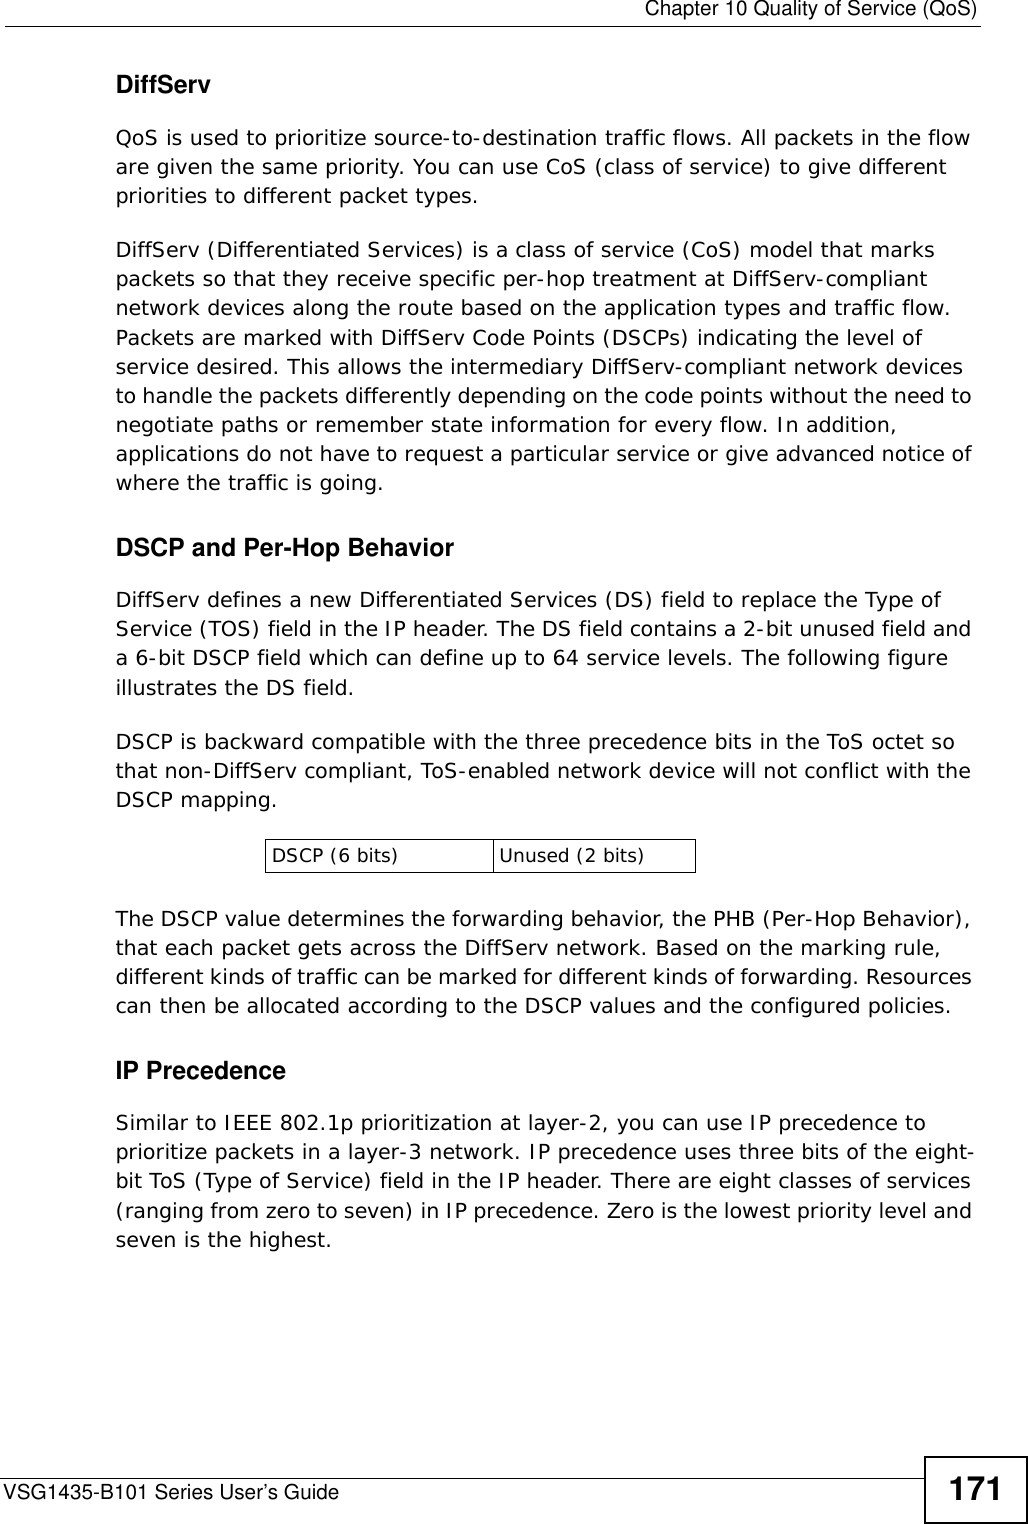  Chapter 10 Quality of Service (QoS)VSG1435-B101 Series User’s Guide 171DiffServ QoS is used to prioritize source-to-destination traffic flows. All packets in the flow are given the same priority. You can use CoS (class of service) to give different priorities to different packet types.DiffServ (Differentiated Services) is a class of service (CoS) model that marks packets so that they receive specific per-hop treatment at DiffServ-compliant network devices along the route based on the application types and traffic flow. Packets are marked with DiffServ Code Points (DSCPs) indicating the level of service desired. This allows the intermediary DiffServ-compliant network devices to handle the packets differently depending on the code points without the need to negotiate paths or remember state information for every flow. In addition, applications do not have to request a particular service or give advanced notice of where the traffic is going. DSCP and Per-Hop Behavior DiffServ defines a new Differentiated Services (DS) field to replace the Type of Service (TOS) field in the IP header. The DS field contains a 2-bit unused field and a 6-bit DSCP field which can define up to 64 service levels. The following figure illustrates the DS field. DSCP is backward compatible with the three precedence bits in the ToS octet so that non-DiffServ compliant, ToS-enabled network device will not conflict with the DSCP mapping.The DSCP value determines the forwarding behavior, the PHB (Per-Hop Behavior), that each packet gets across the DiffServ network. Based on the marking rule, different kinds of traffic can be marked for different kinds of forwarding. Resources can then be allocated according to the DSCP values and the configured policies.IP PrecedenceSimilar to IEEE 802.1p prioritization at layer-2, you can use IP precedence to prioritize packets in a layer-3 network. IP precedence uses three bits of the eight-bit ToS (Type of Service) field in the IP header. There are eight classes of services (ranging from zero to seven) in IP precedence. Zero is the lowest priority level and seven is the highest. DSCP (6 bits) Unused (2 bits)